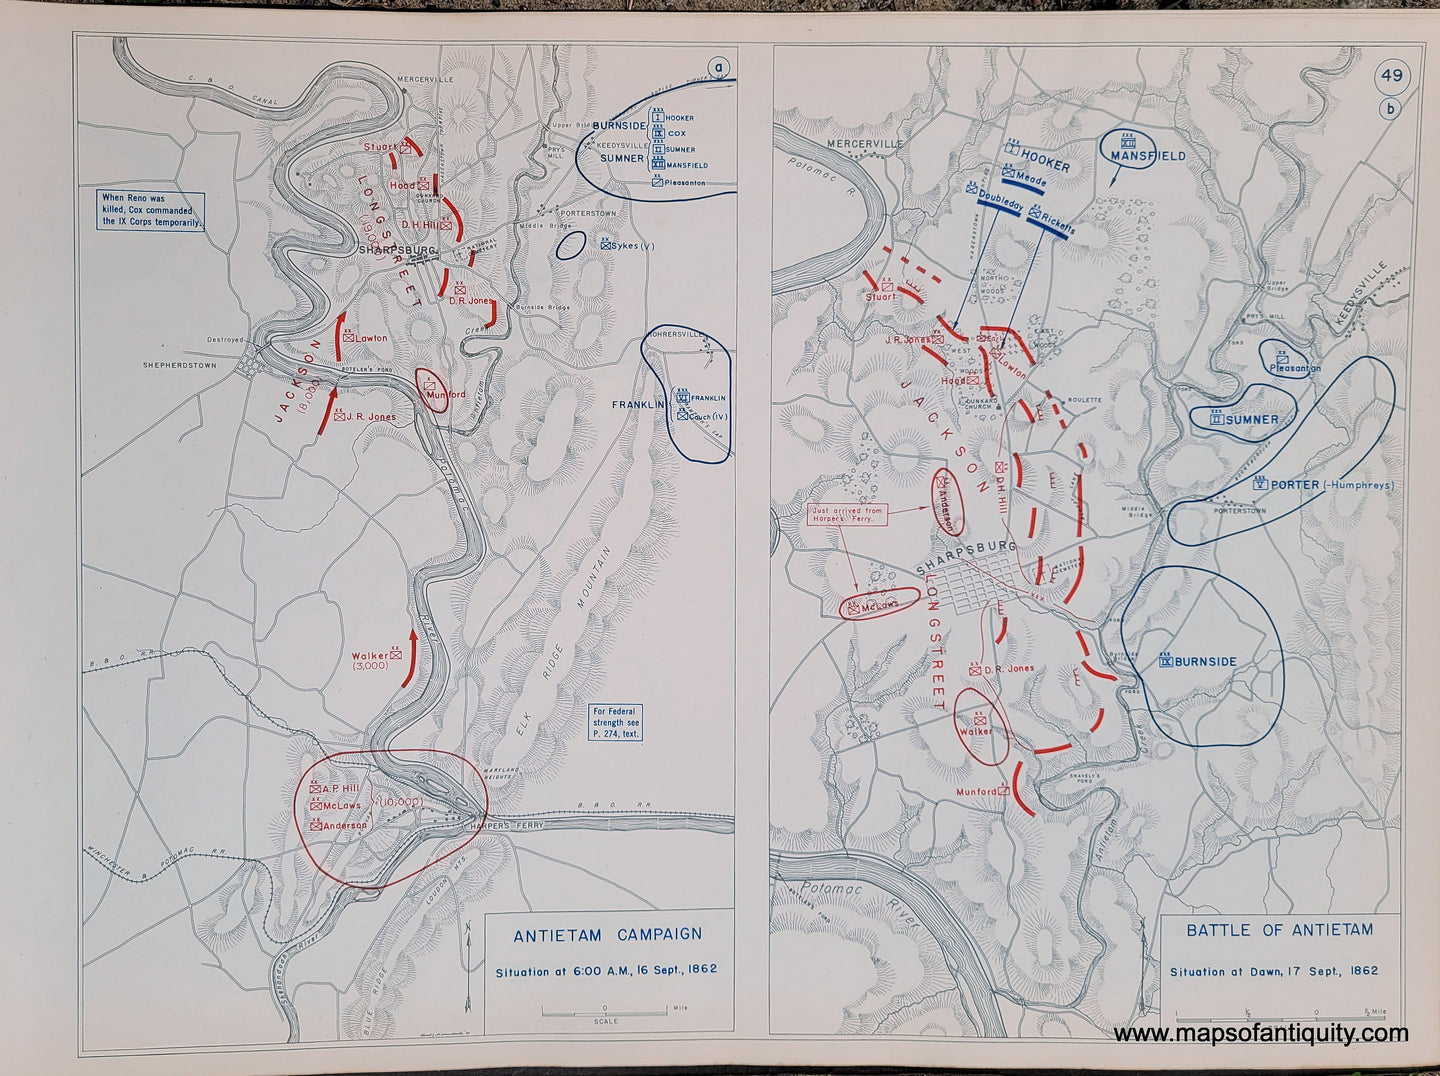 Genuine-Antique-Map-Antietam-Campaign-Situation-at-6-00-AM-16-Sept--1862-and-Battle-of-Antietam-Situation-at-Dawn-17-Sept--1862-1948-Matthew-Forney-Steele-Dept-of-Military-Art-and-Engineering-US-Military-Academy-West-Point-Maps-Of-Antiquity